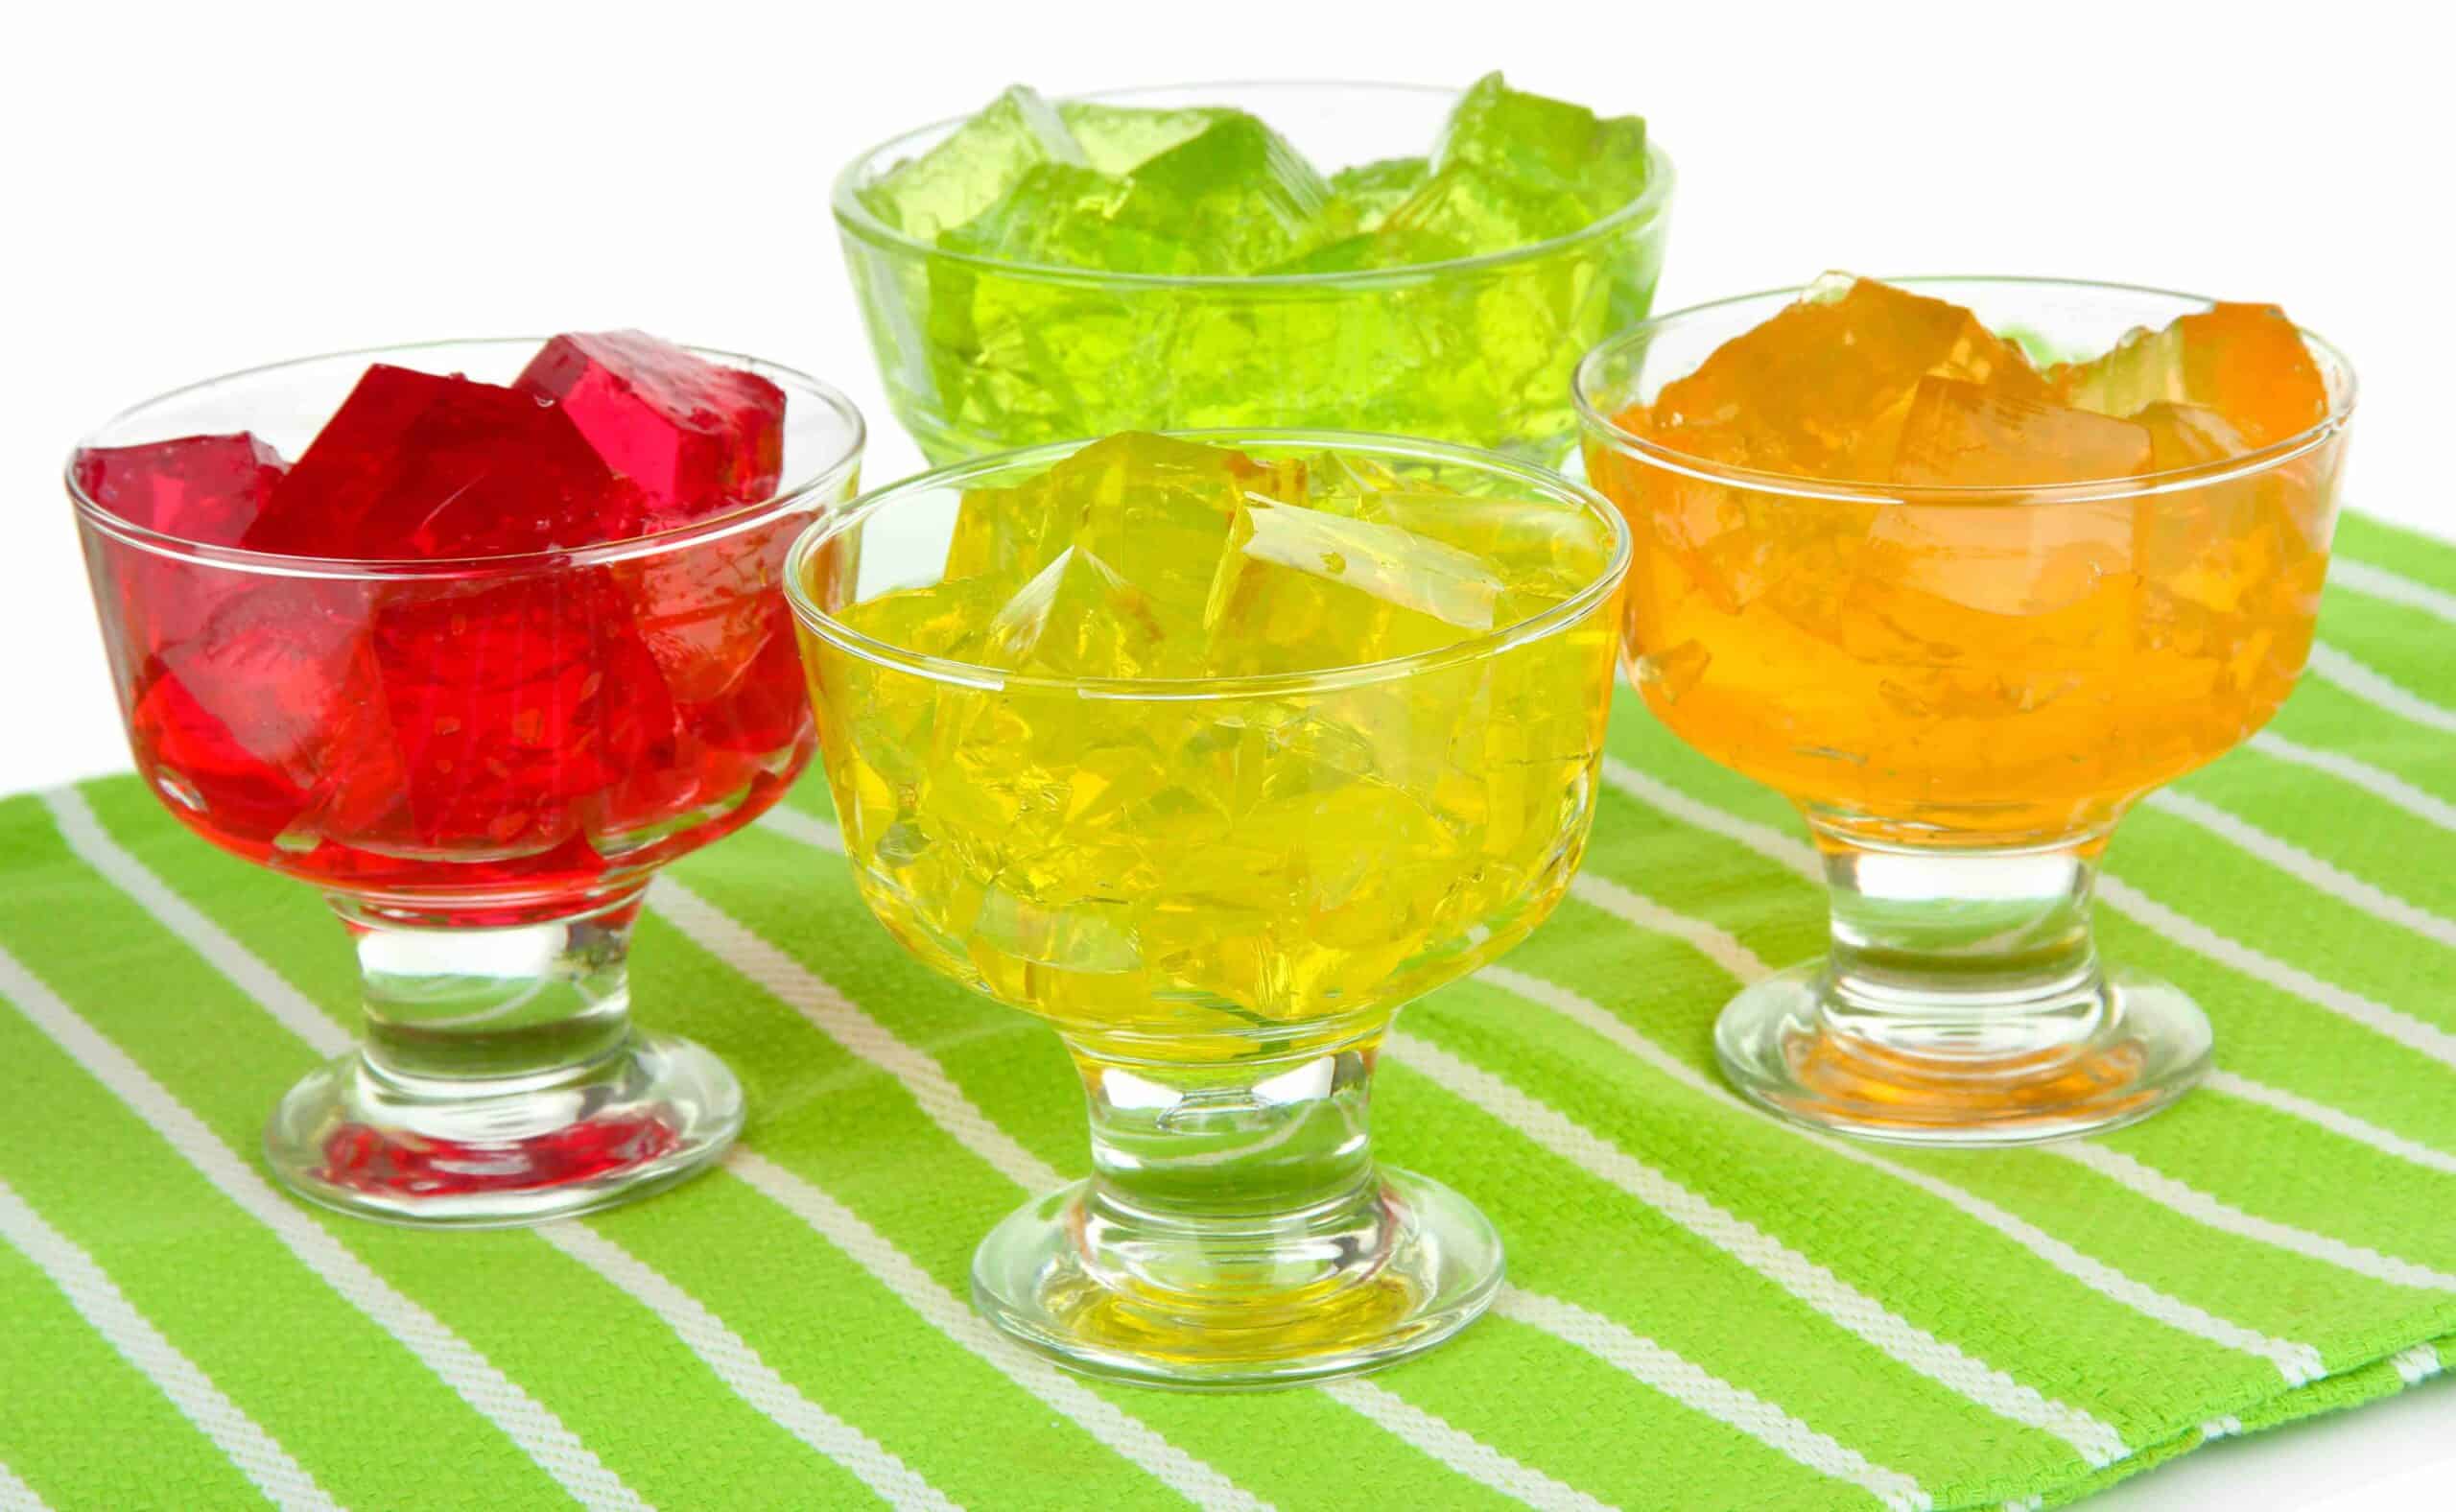 Tasty jelly cubes in bowls on table on white background